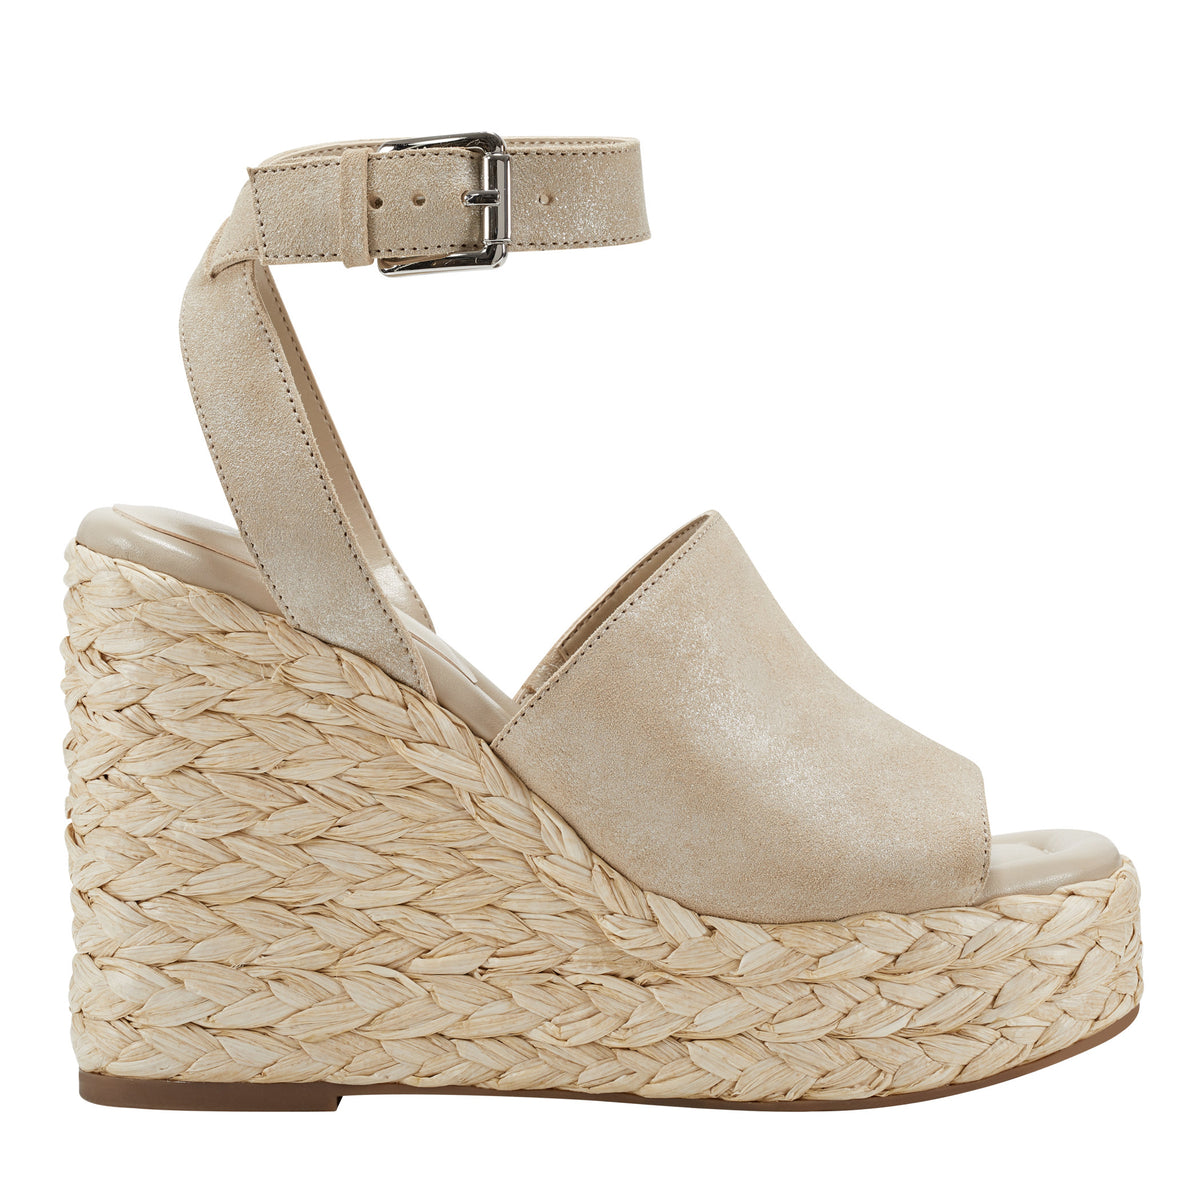 Nelly Espadrille Wedge Sandal